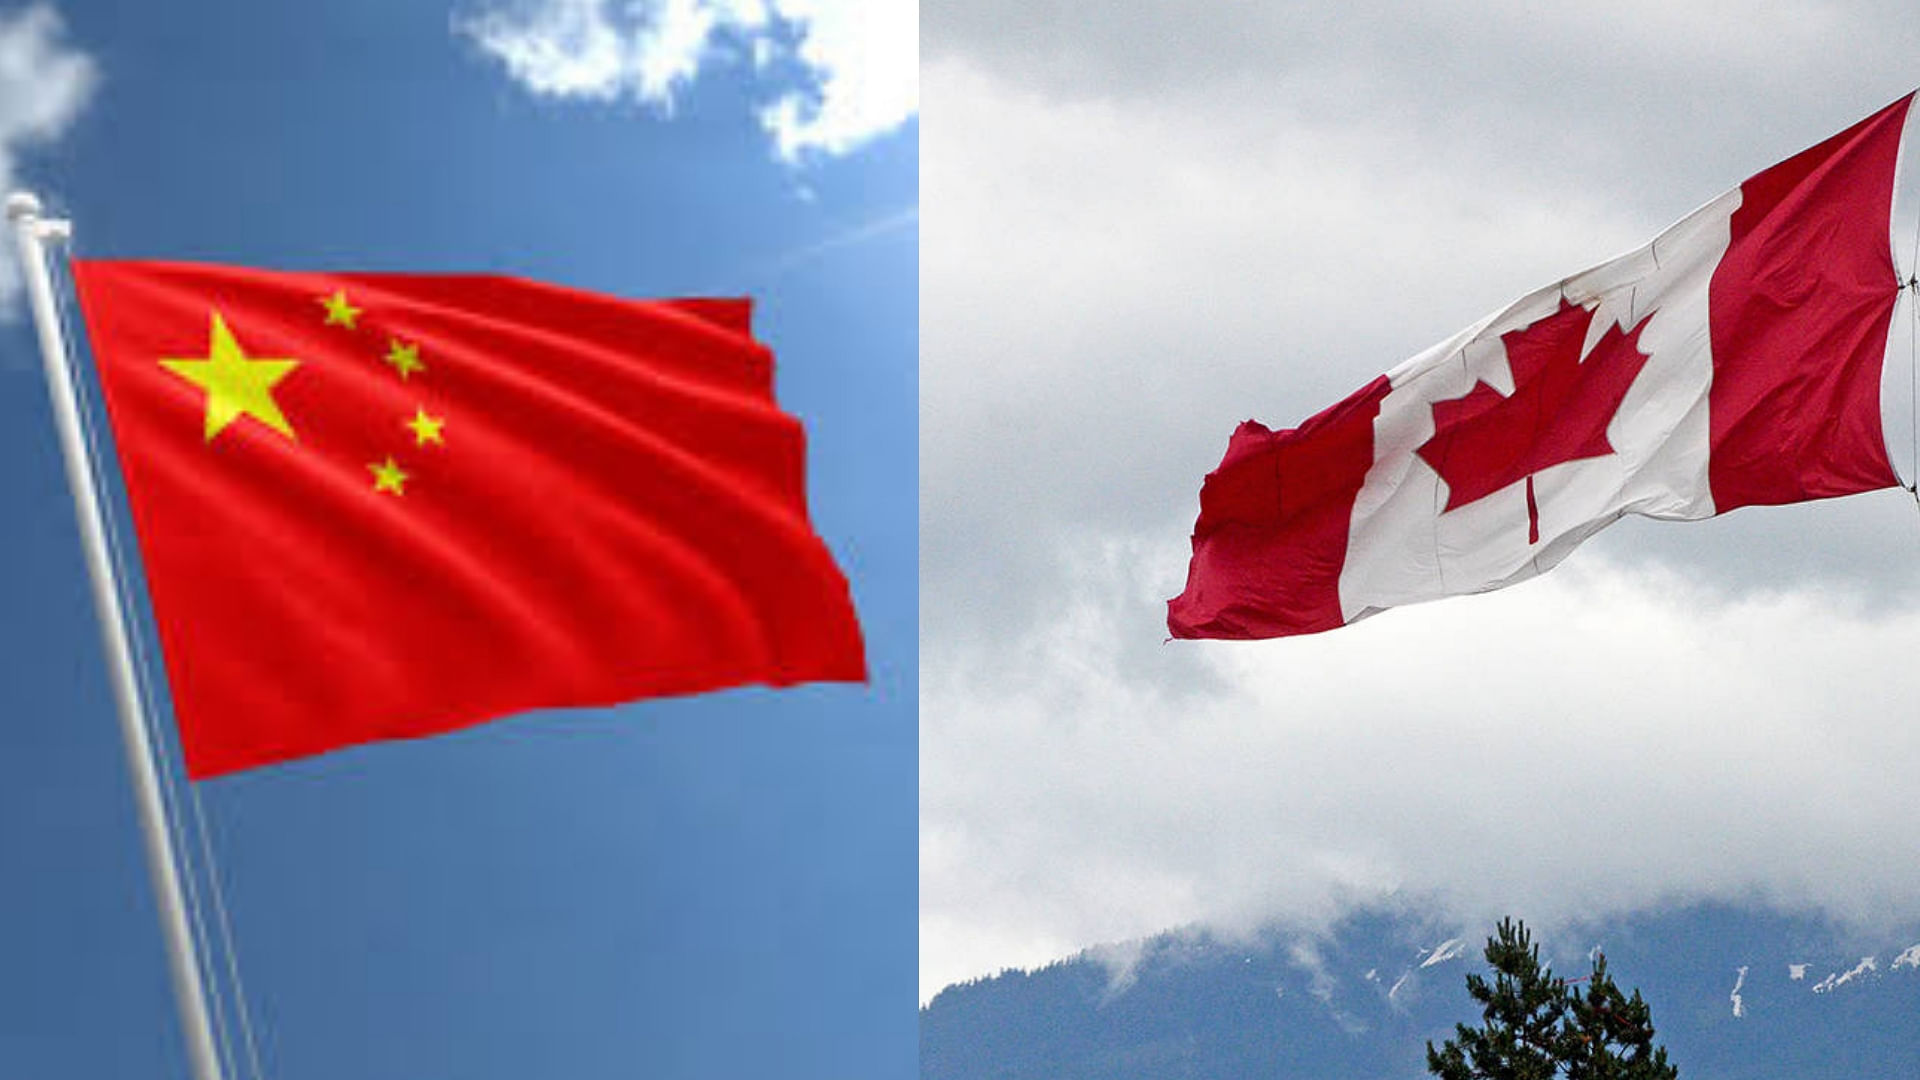 Tensions between China and Canada have escalated after a Canadian citizen was sentenced to death over drug charges in China.&nbsp;